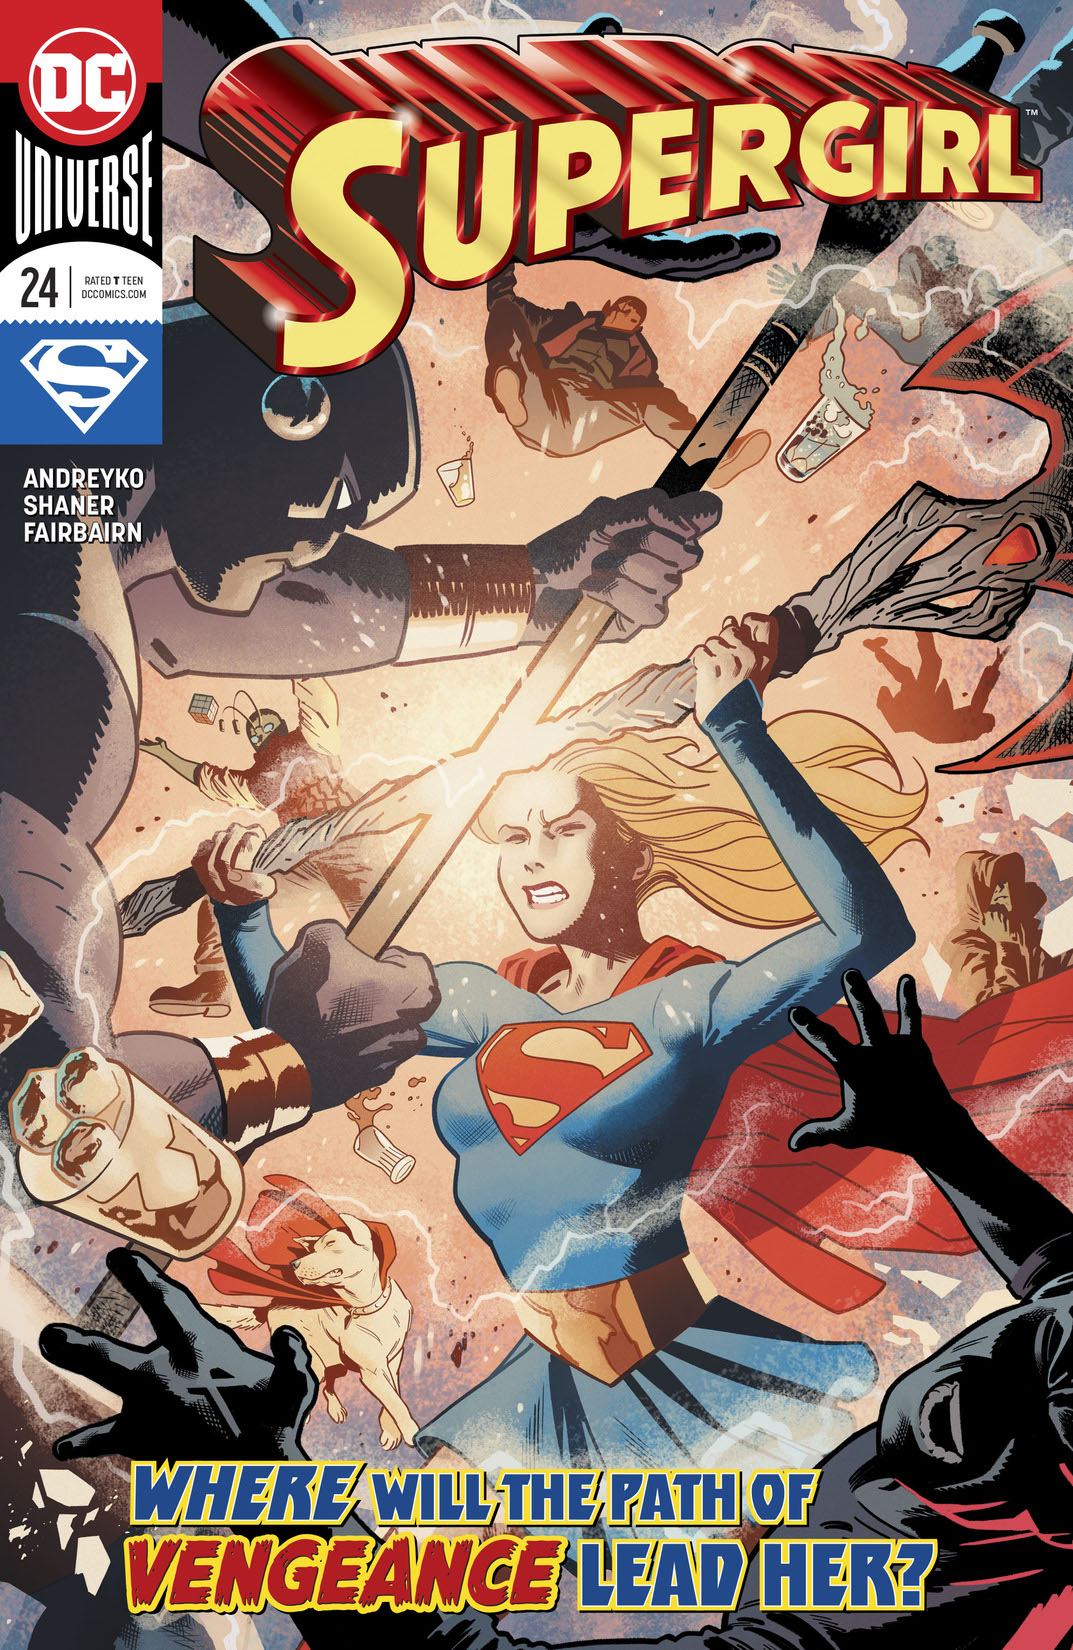 Supergirl (2016-) #24 preview images